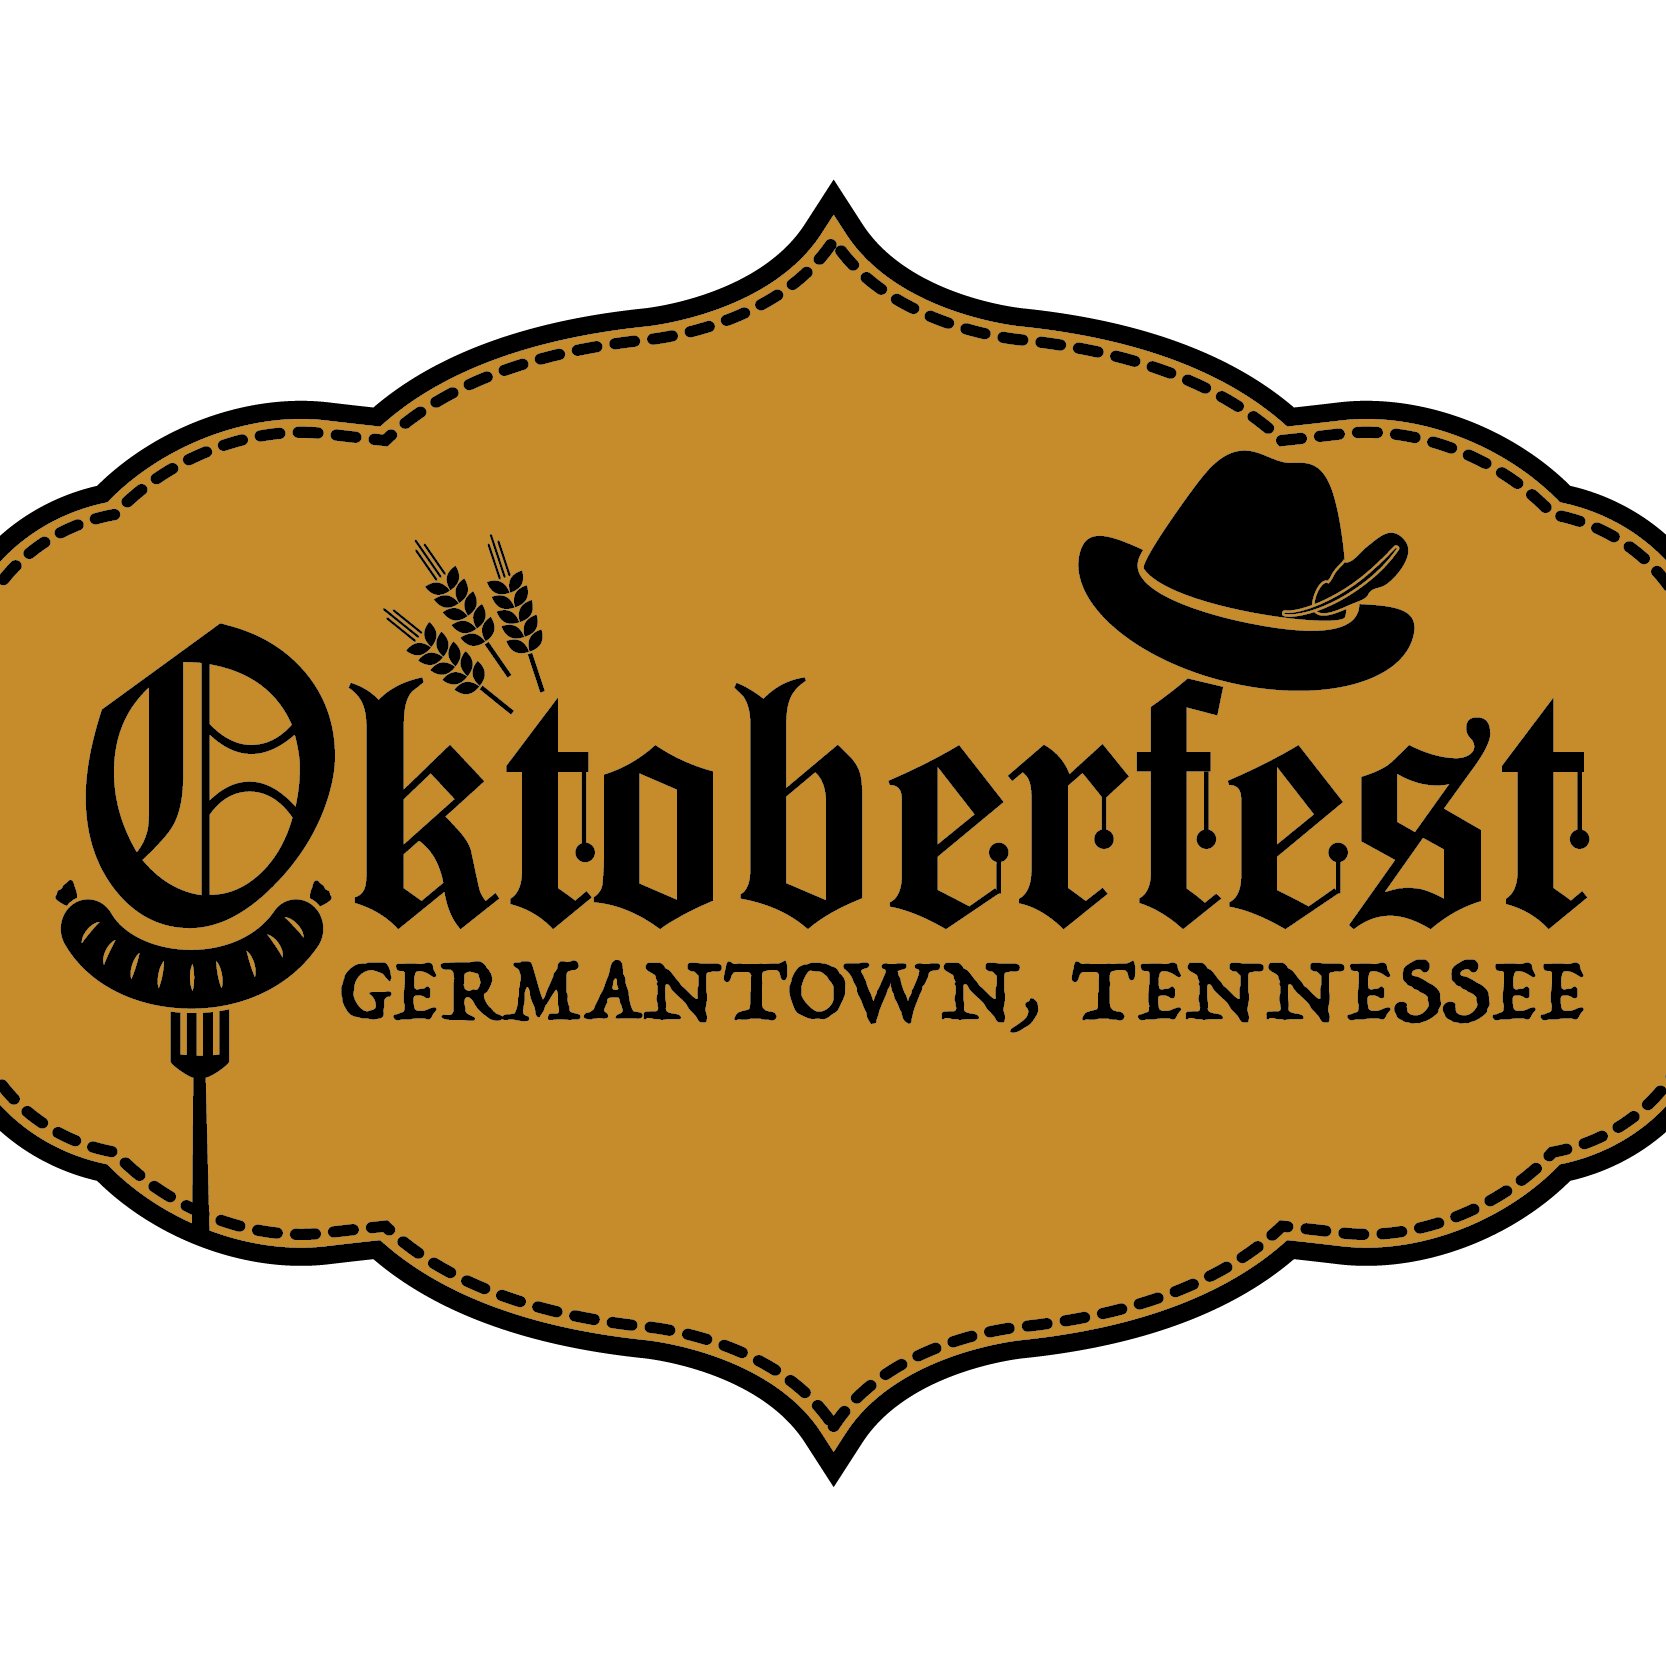 The Oktoberfest fun will be in 2019! We can't wait!